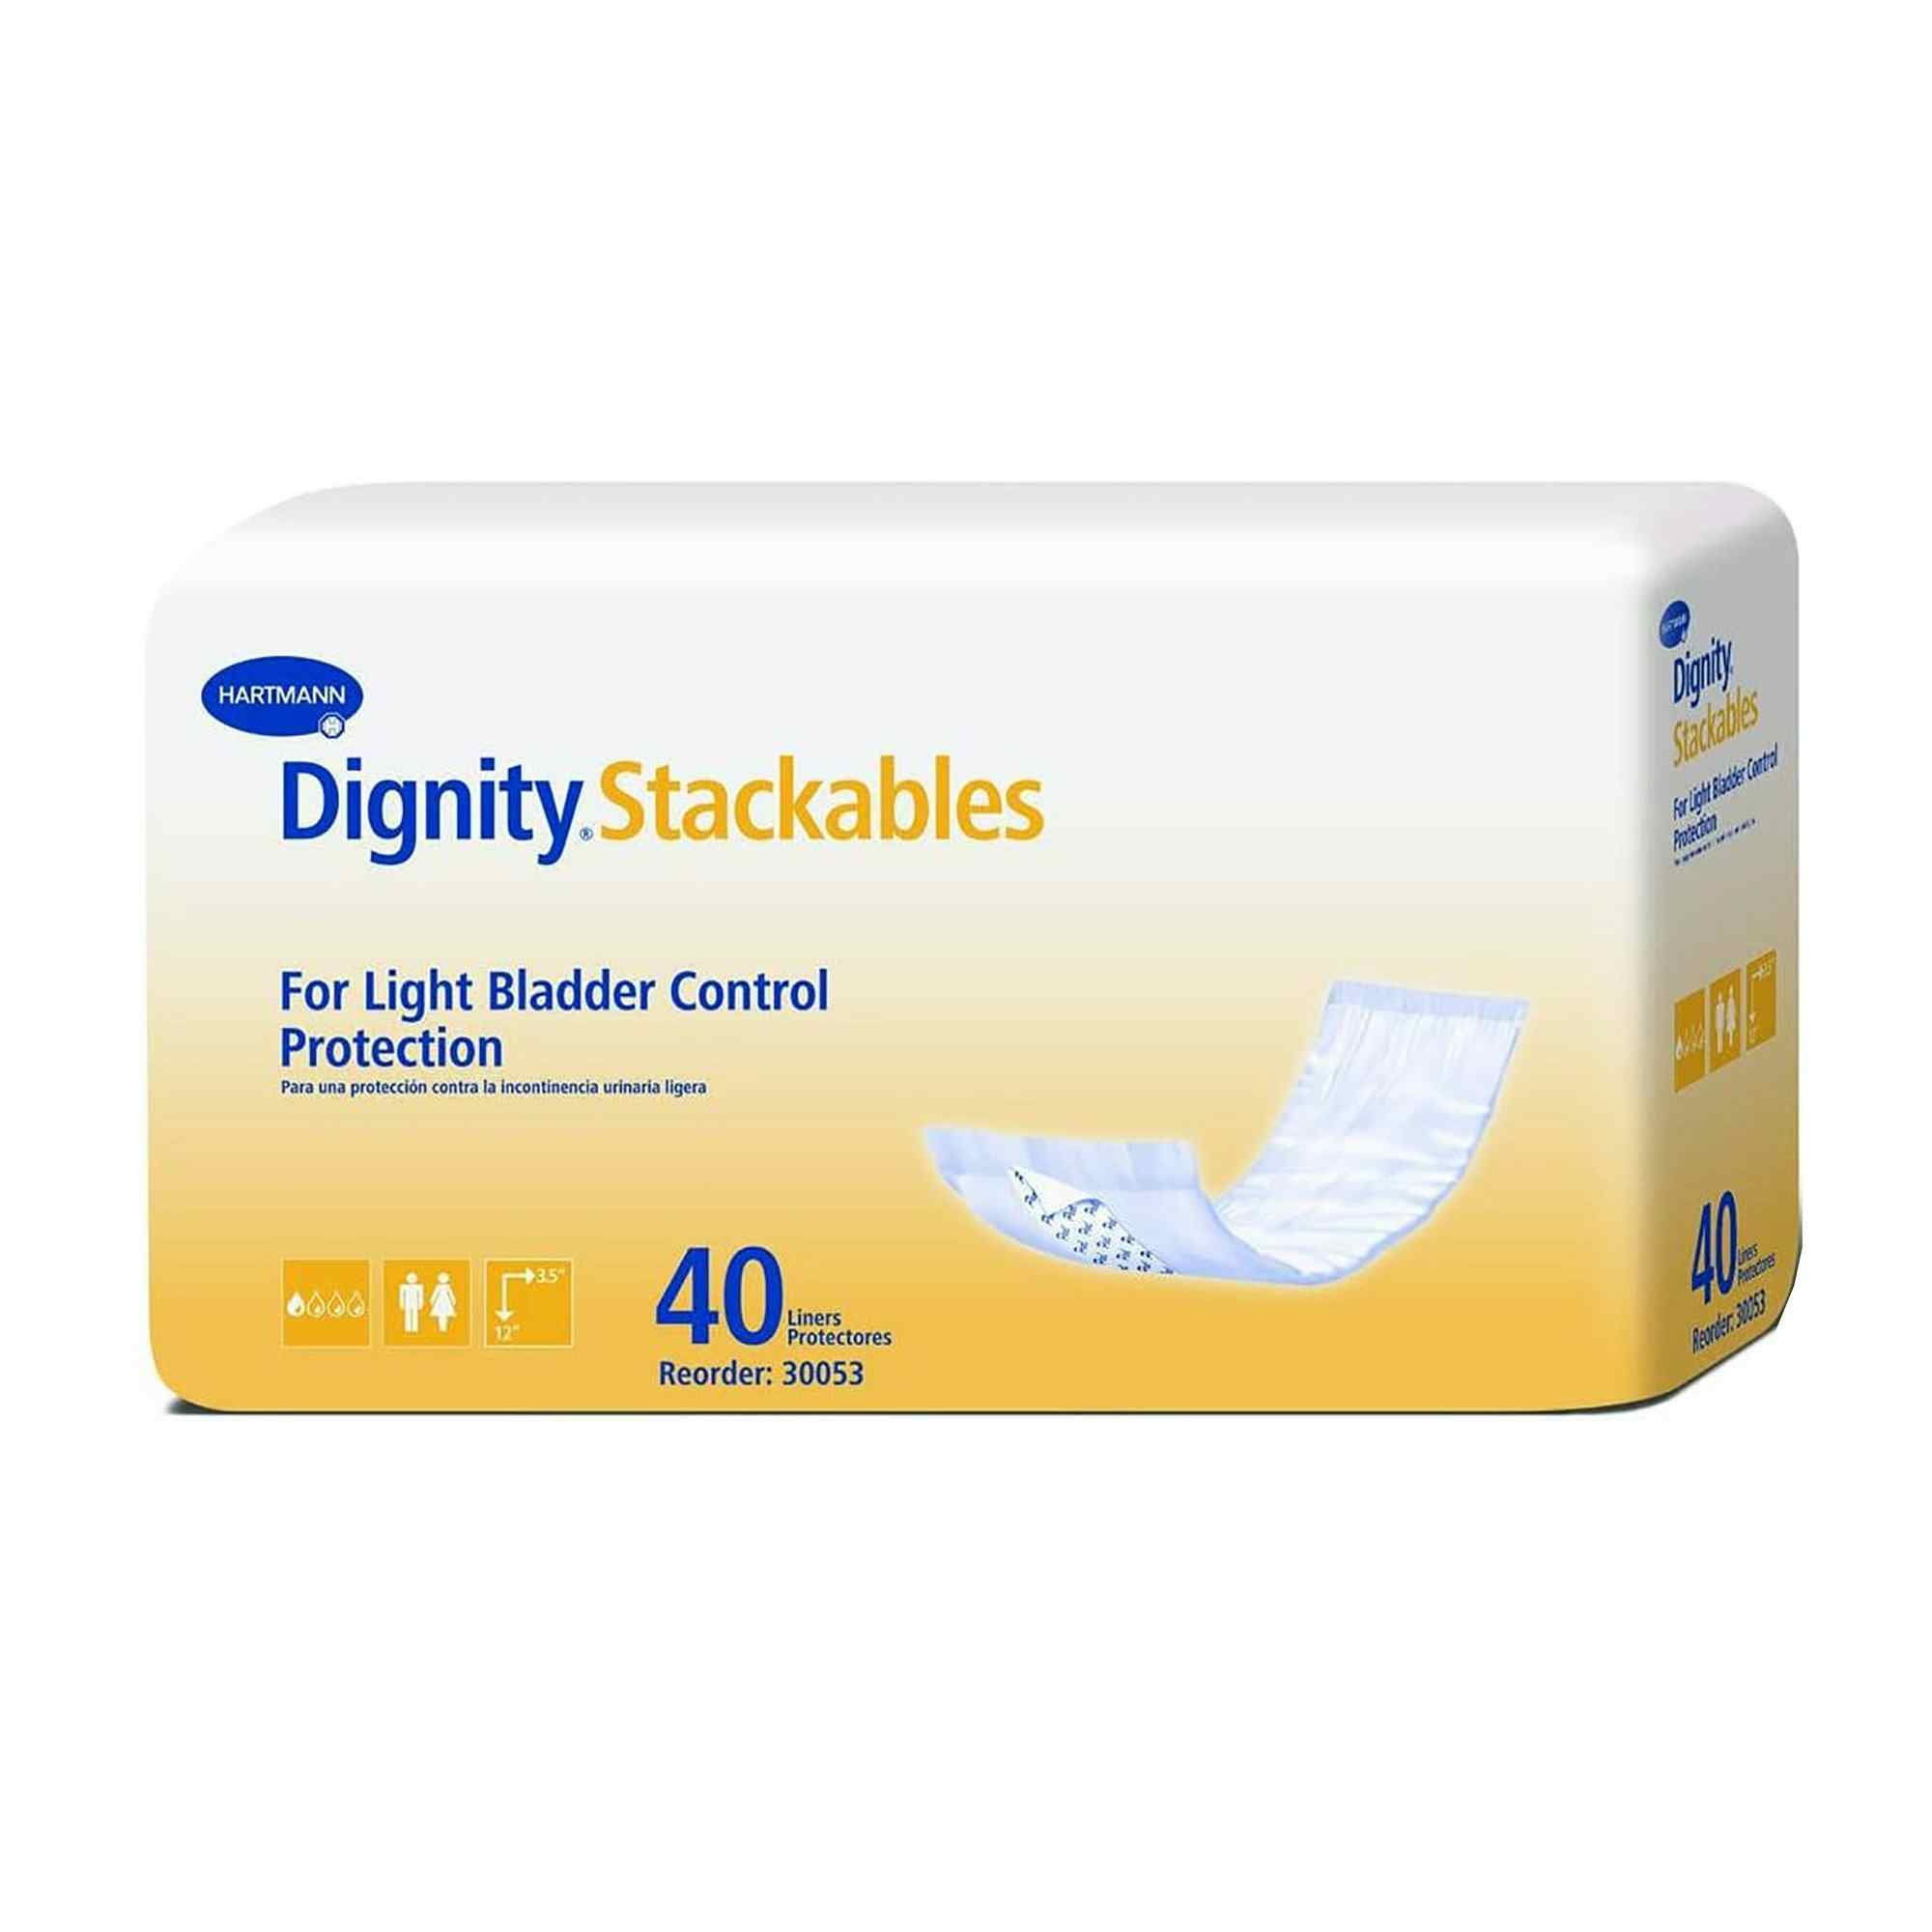 Dignity Stackables Adult Unisex Disposable Bladder Control Pad, Light Absorbency, 30053-180, Medium (3.5-12") - Pack of 45